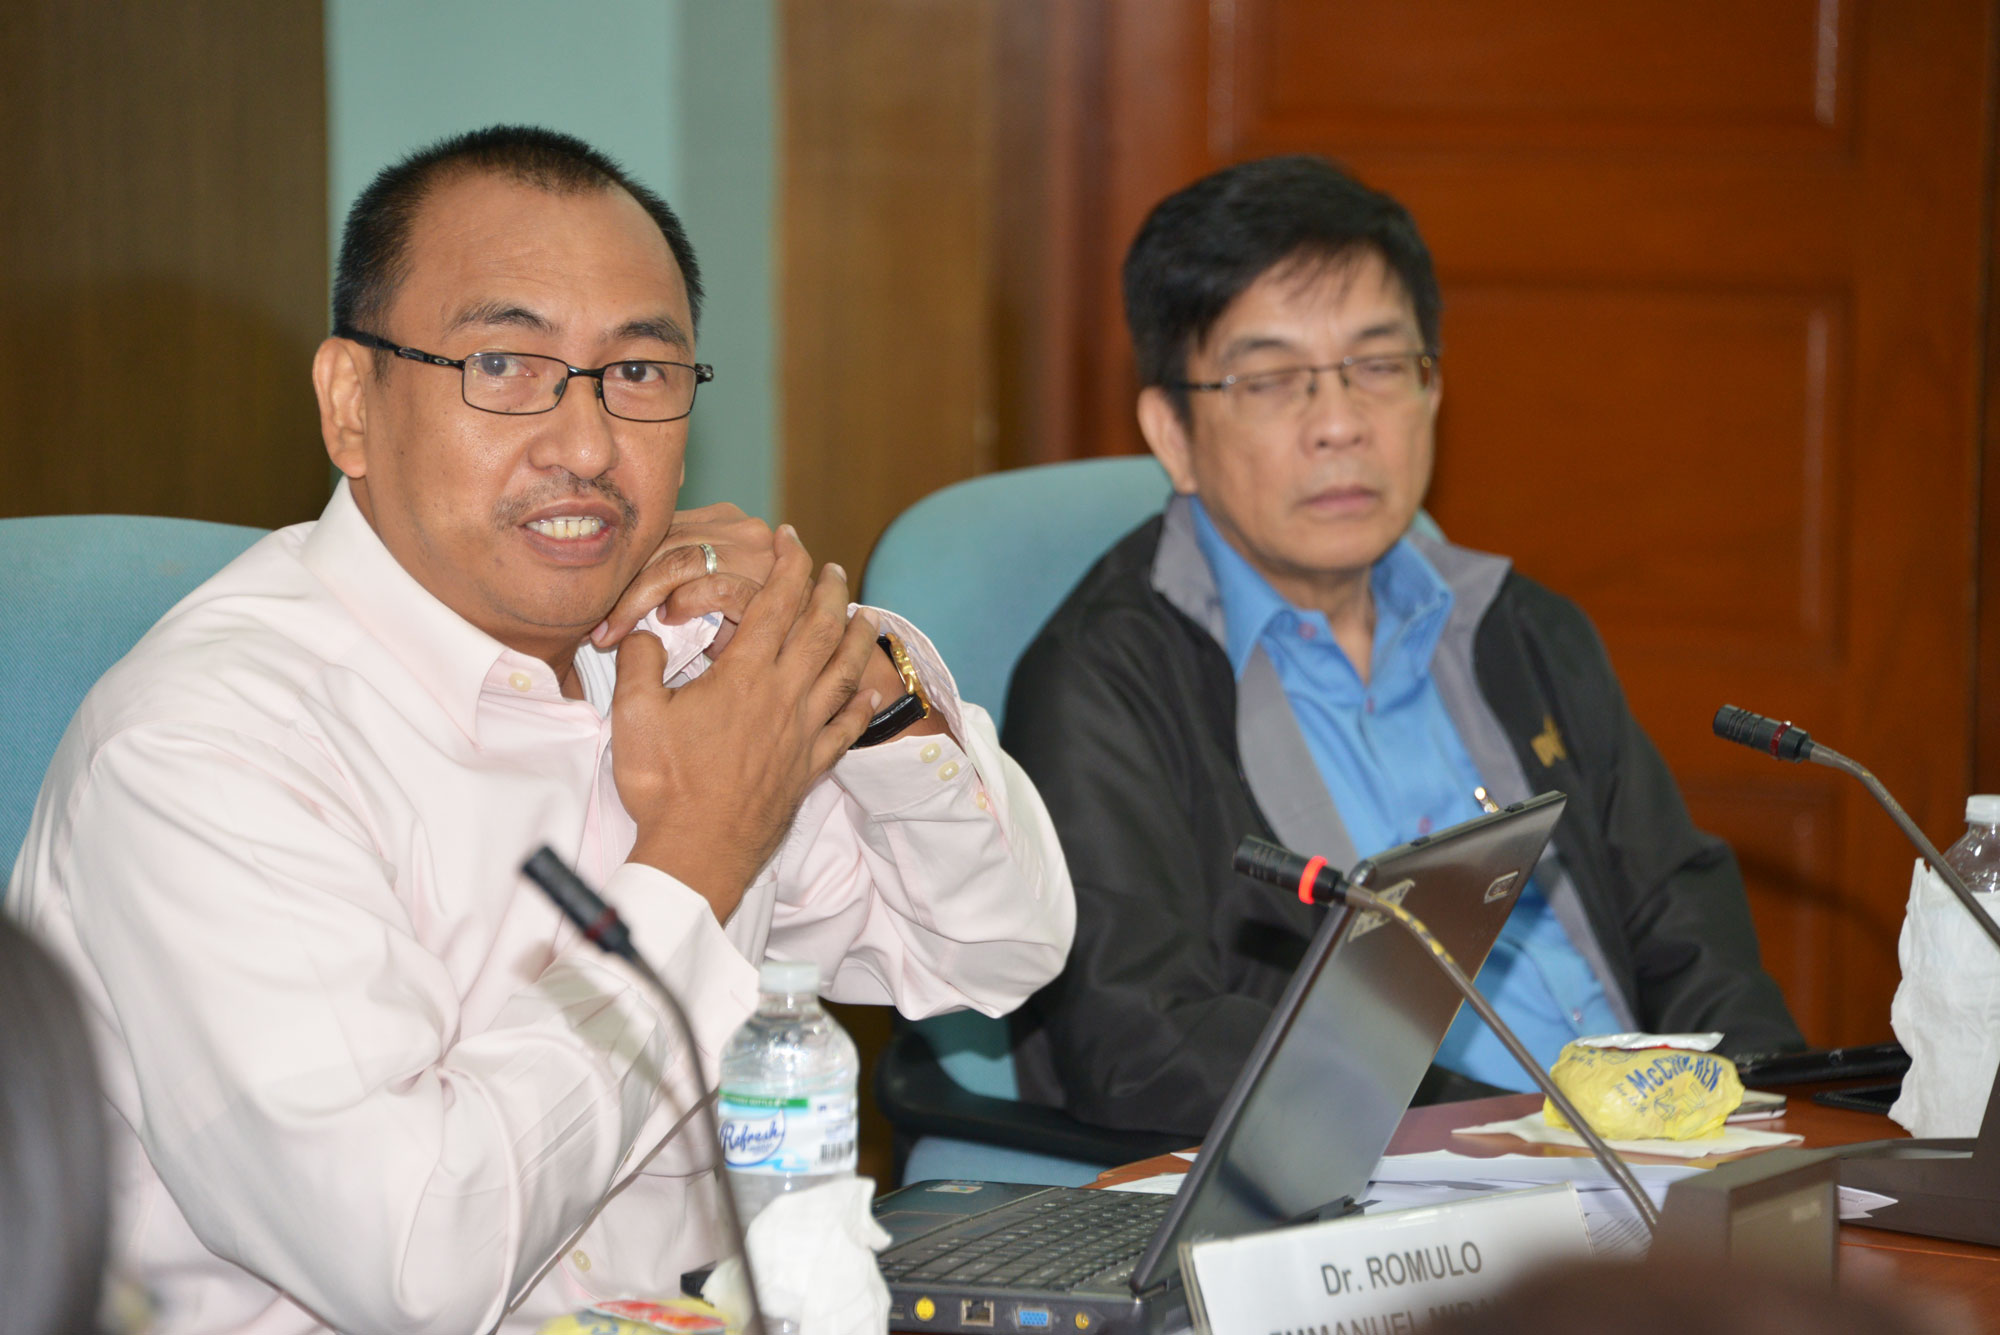 PIDS-CPBRD Forum Series: Assessment Of The Bottom-Up Budgeting Process For FY 2015-DSC_0690.jpg